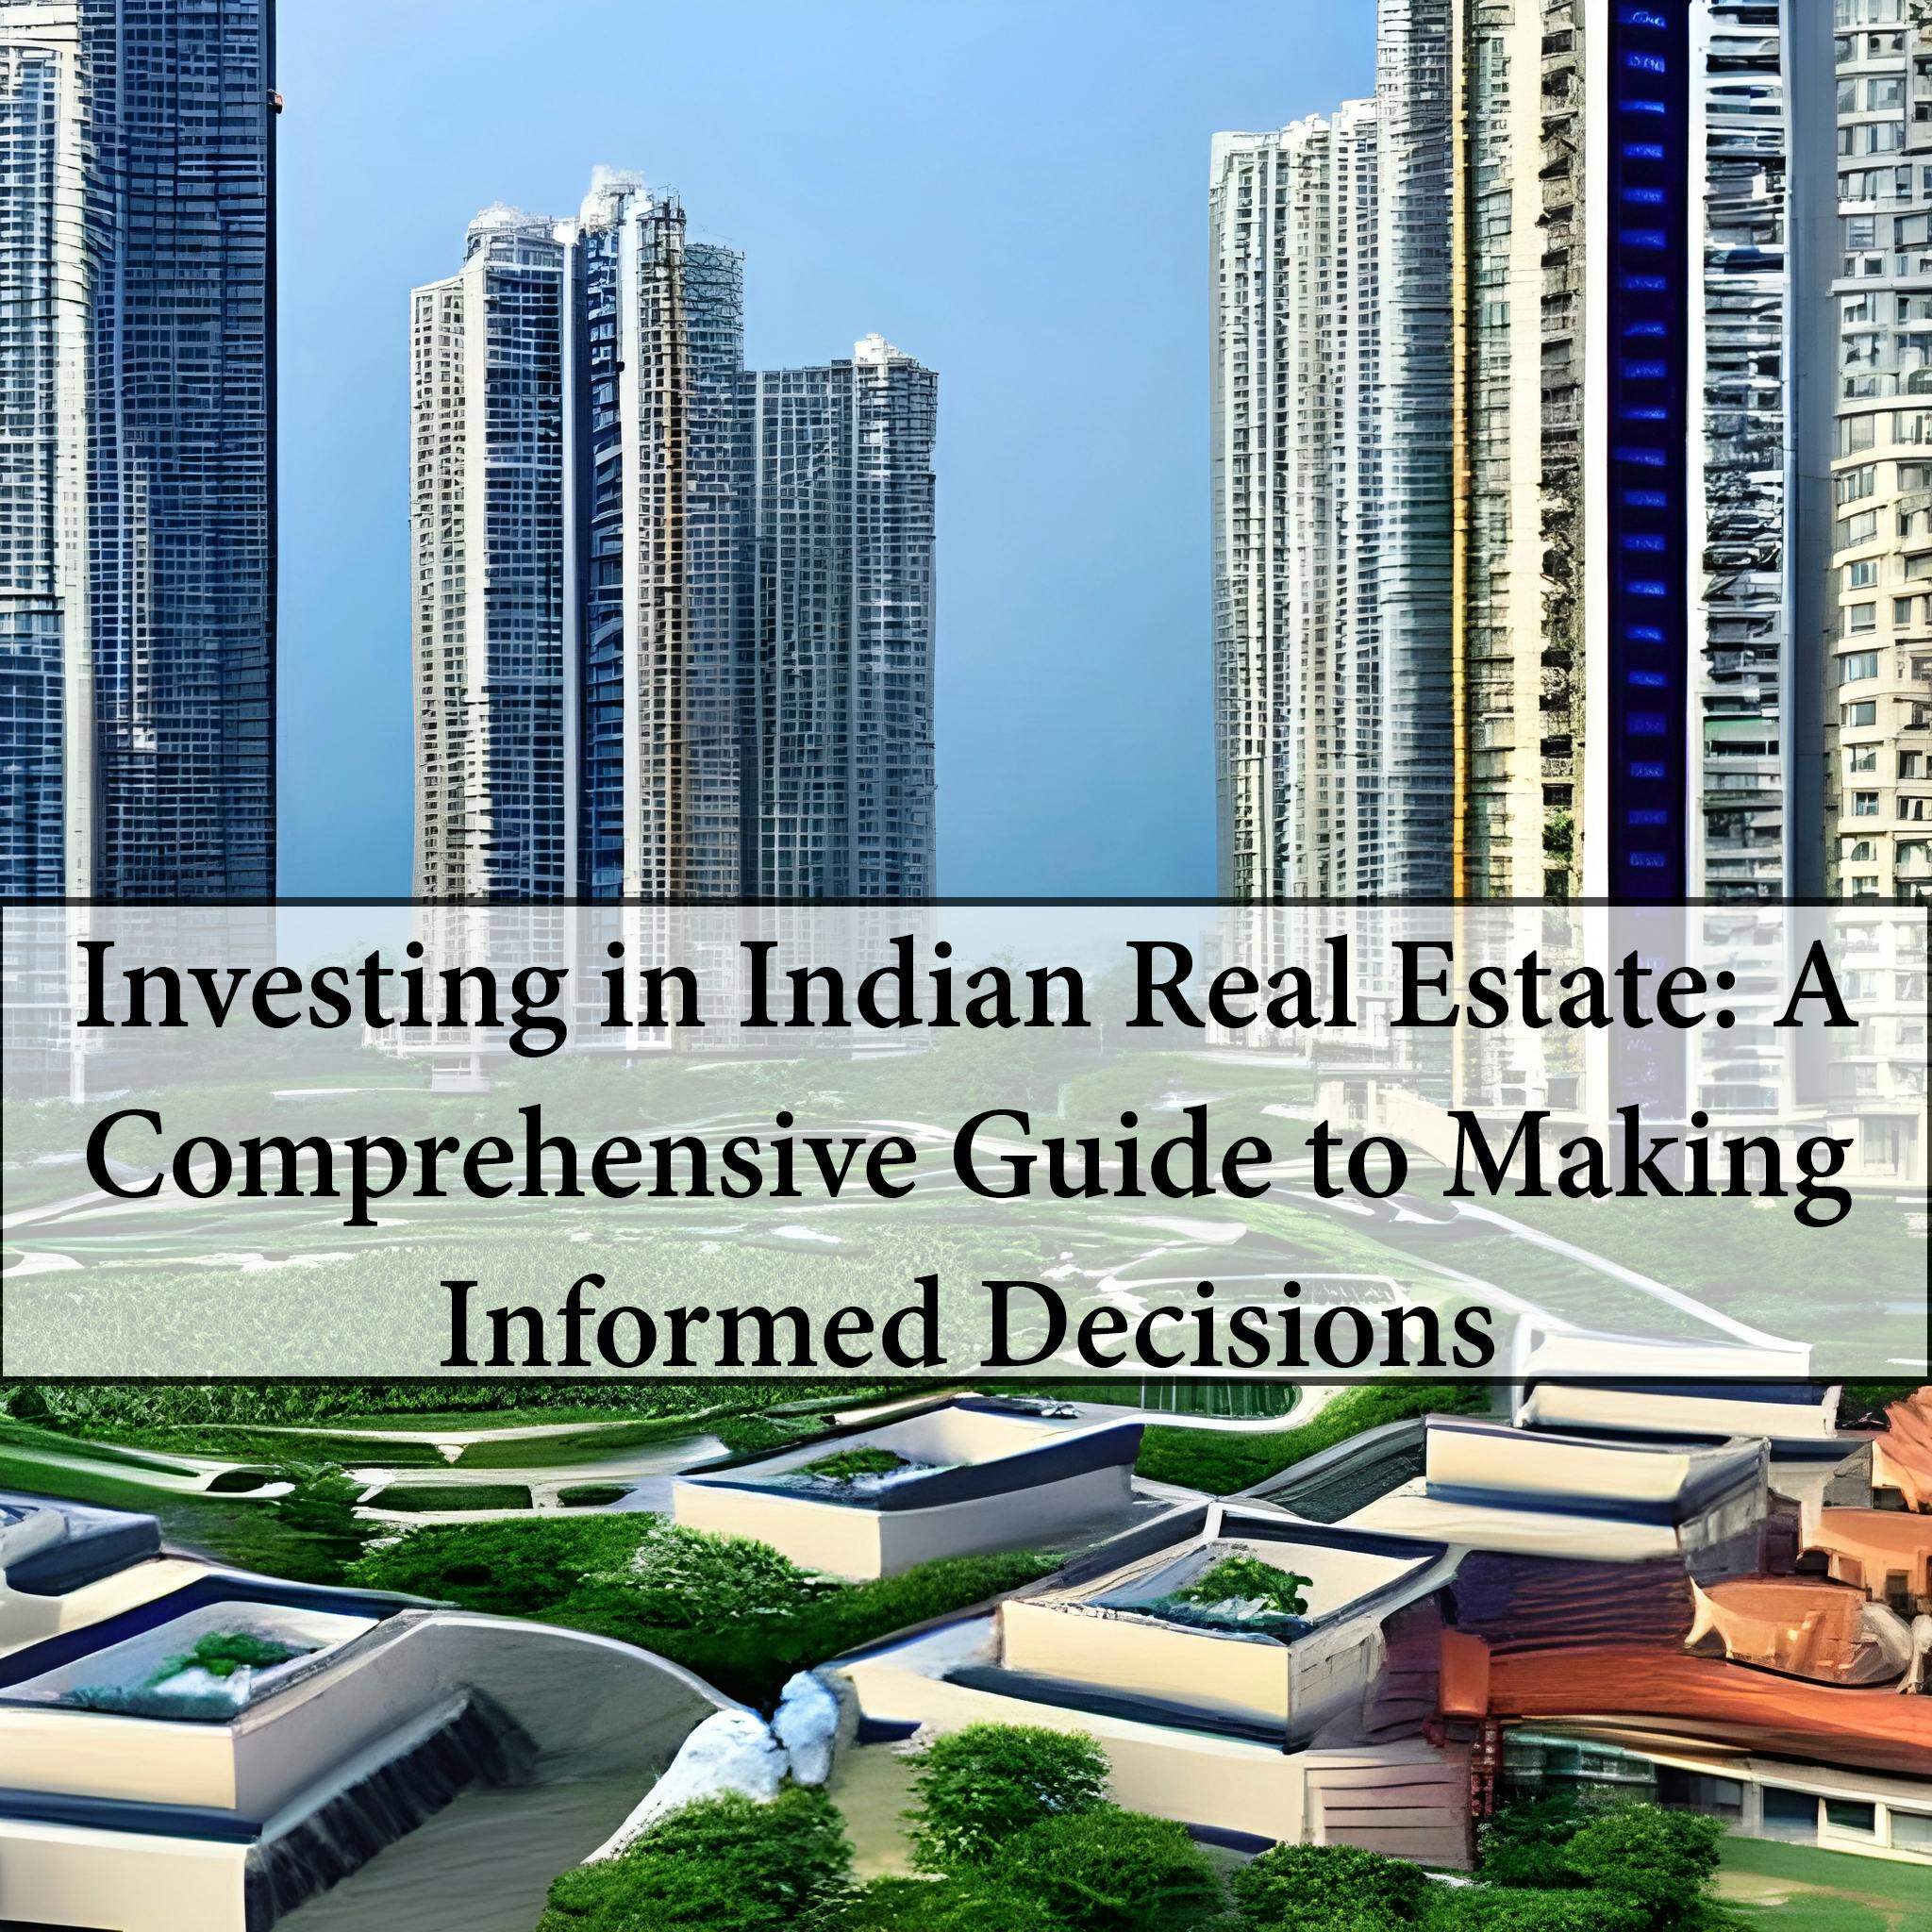 Investing in Indian Real Estate: A Comprehensive Guide to Making Informed Decisions